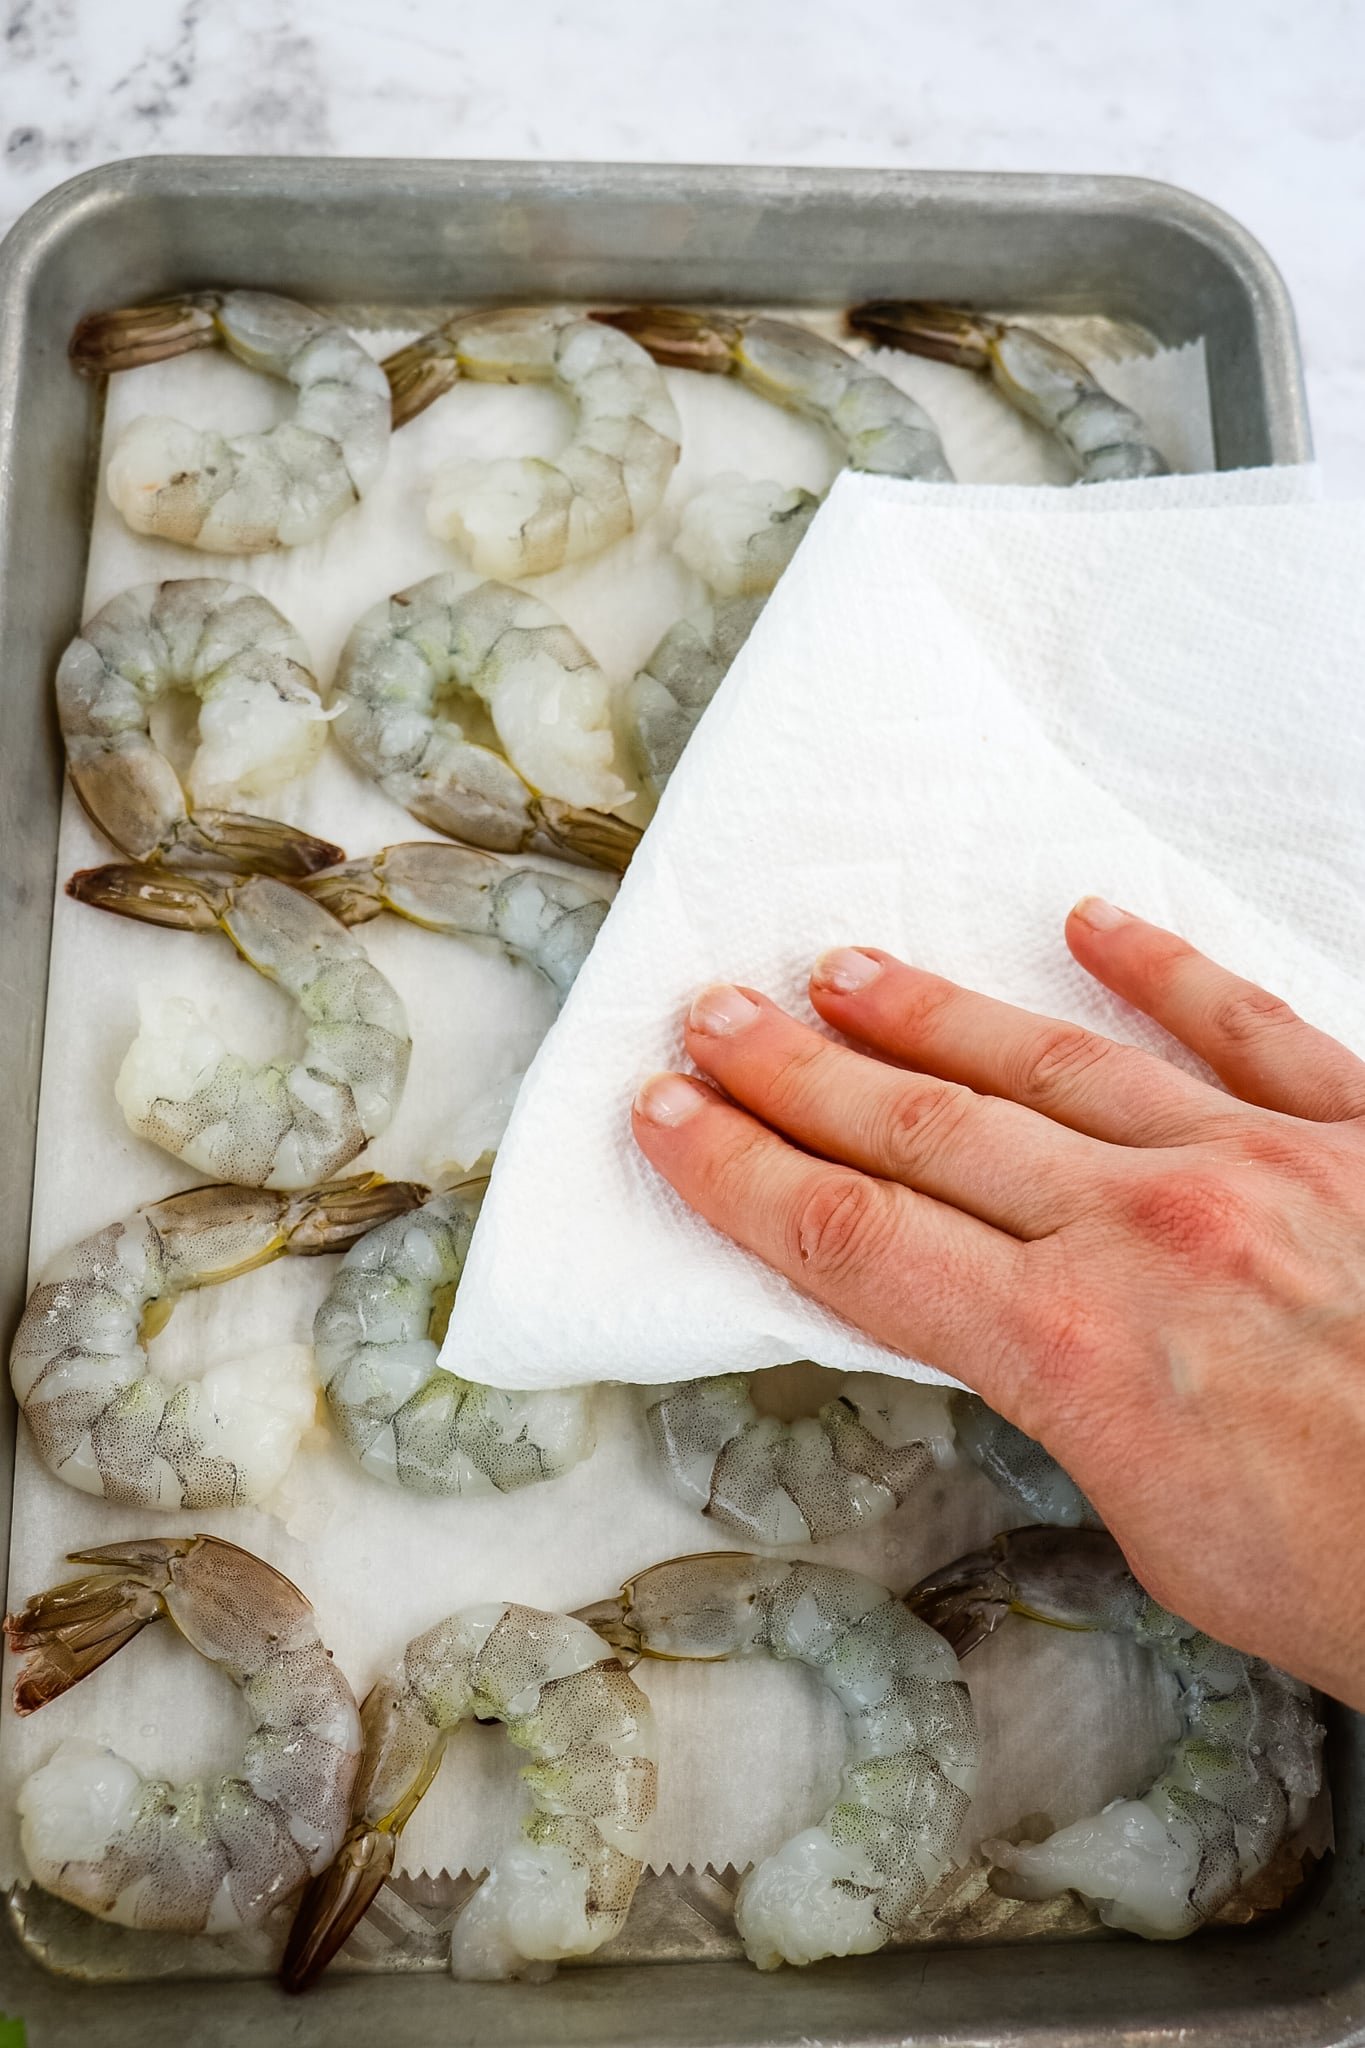 Raw shrimp being dried with a paper towel.